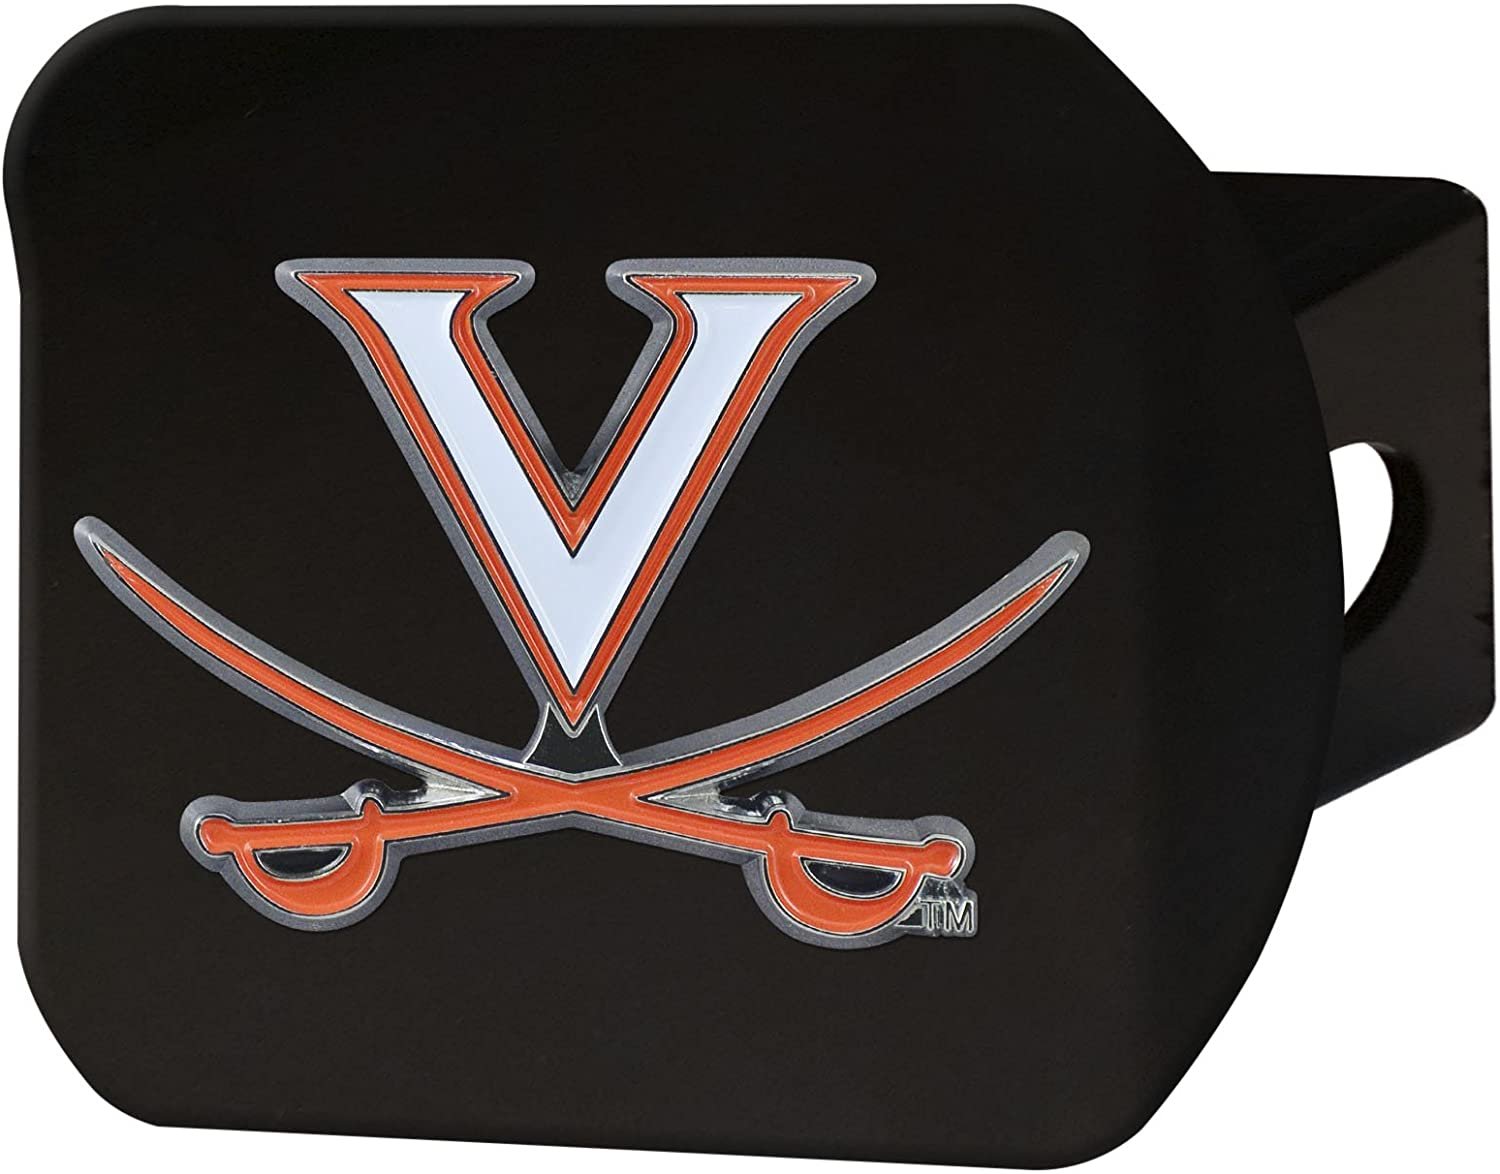 Virginia Cavaliers Hitch Cover Black Solid Metal with Raised Color Metal Emblem 2" Square Type III University of